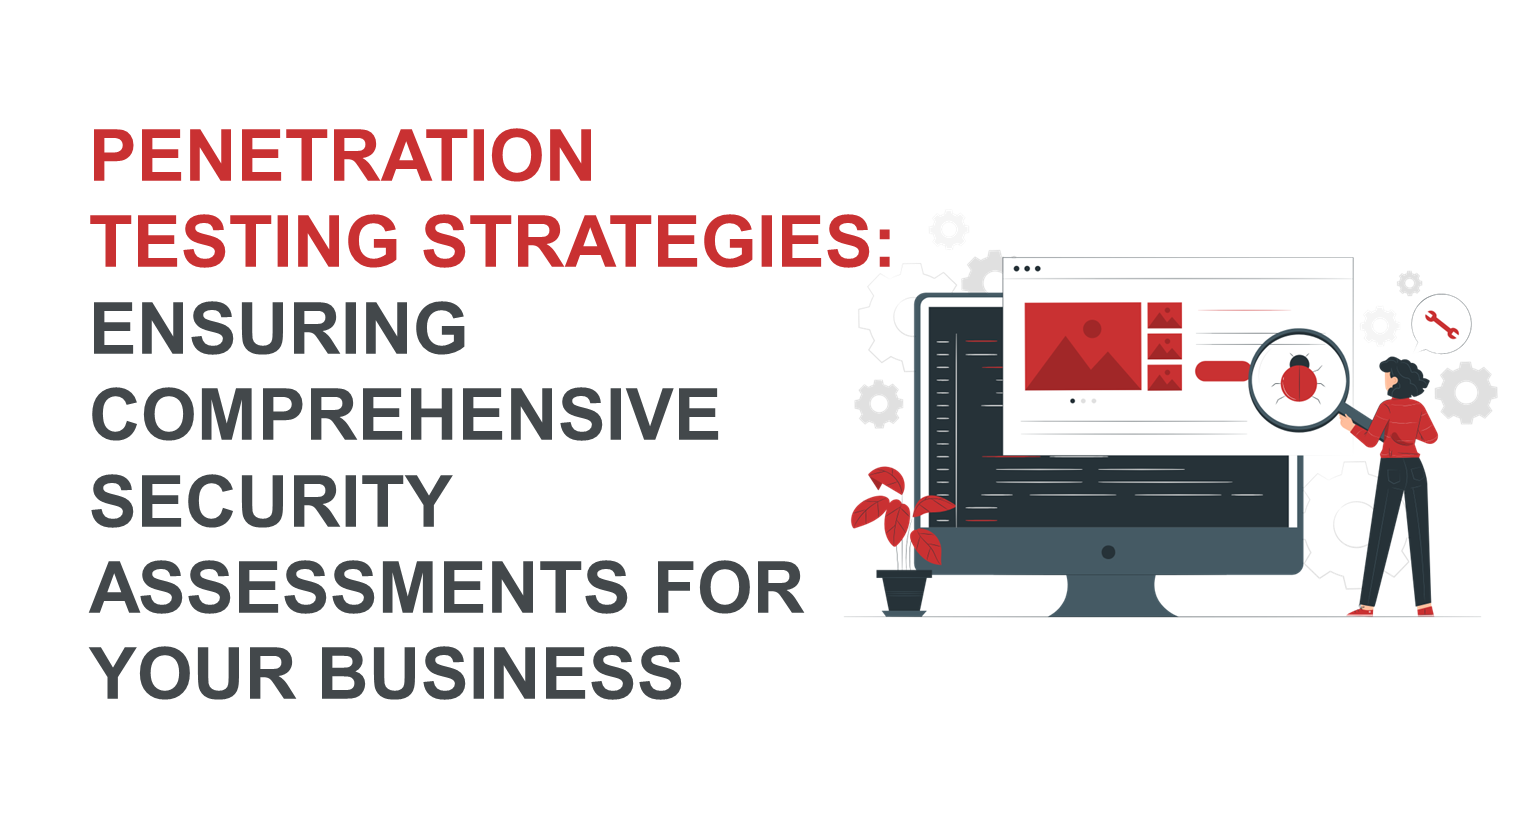 Penetration Testing Strategies: Ensuring Comprehensive Security Assessments for Your Business